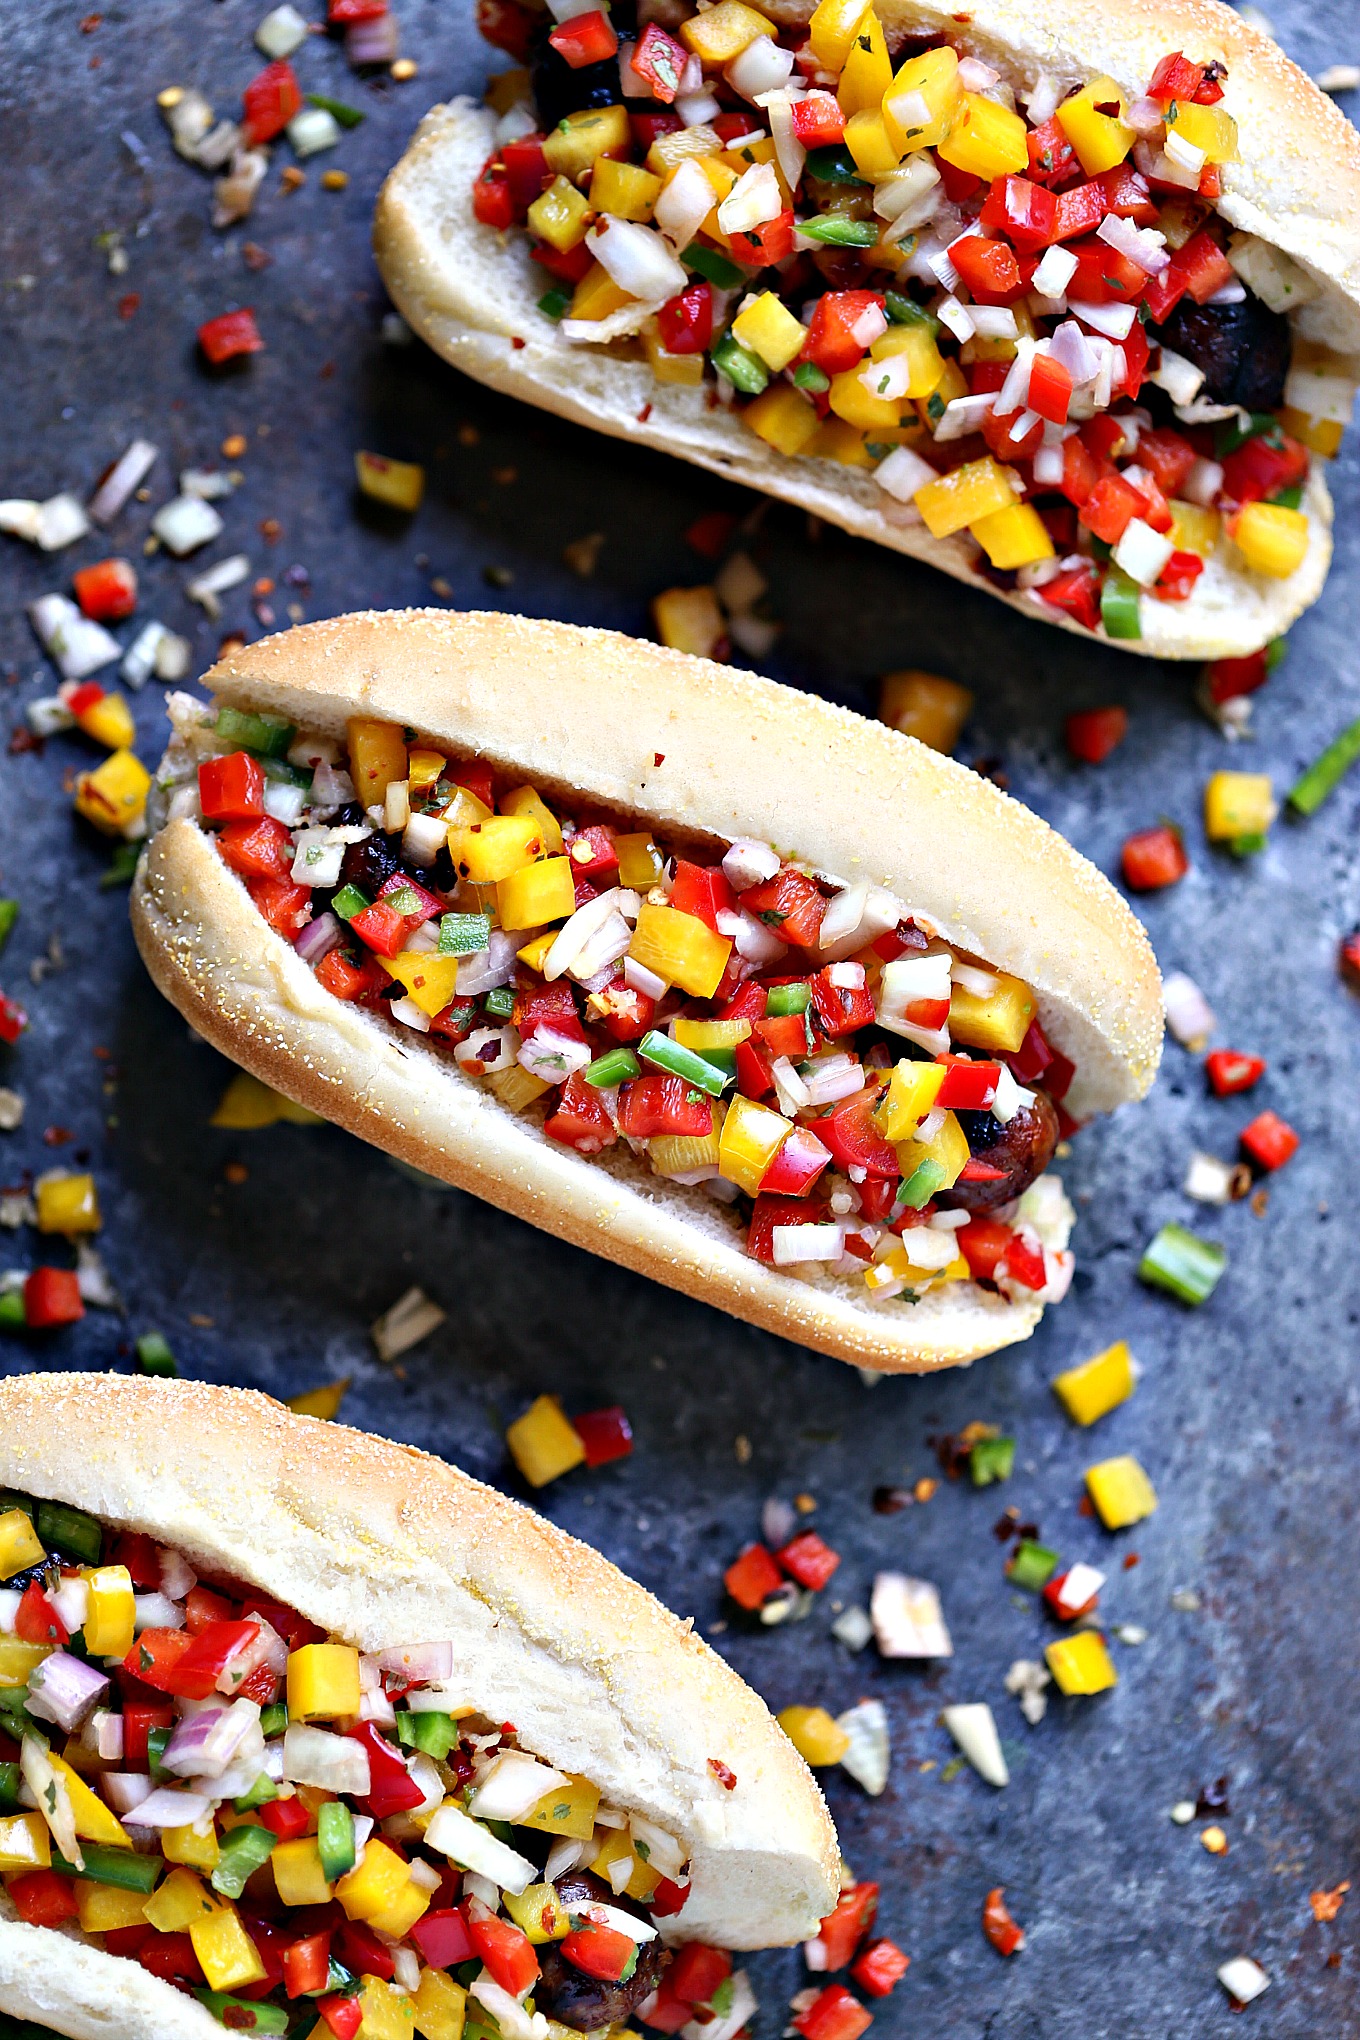 Grilled Beer Brats with Boozy Salsa from cravingsofalunatic.com- Fire up your grill this weekend and make these amazing grilled beer brats. Top with boozy salsa filled with bell peppers, onions, shallots, jalapeno peppers and garlic.